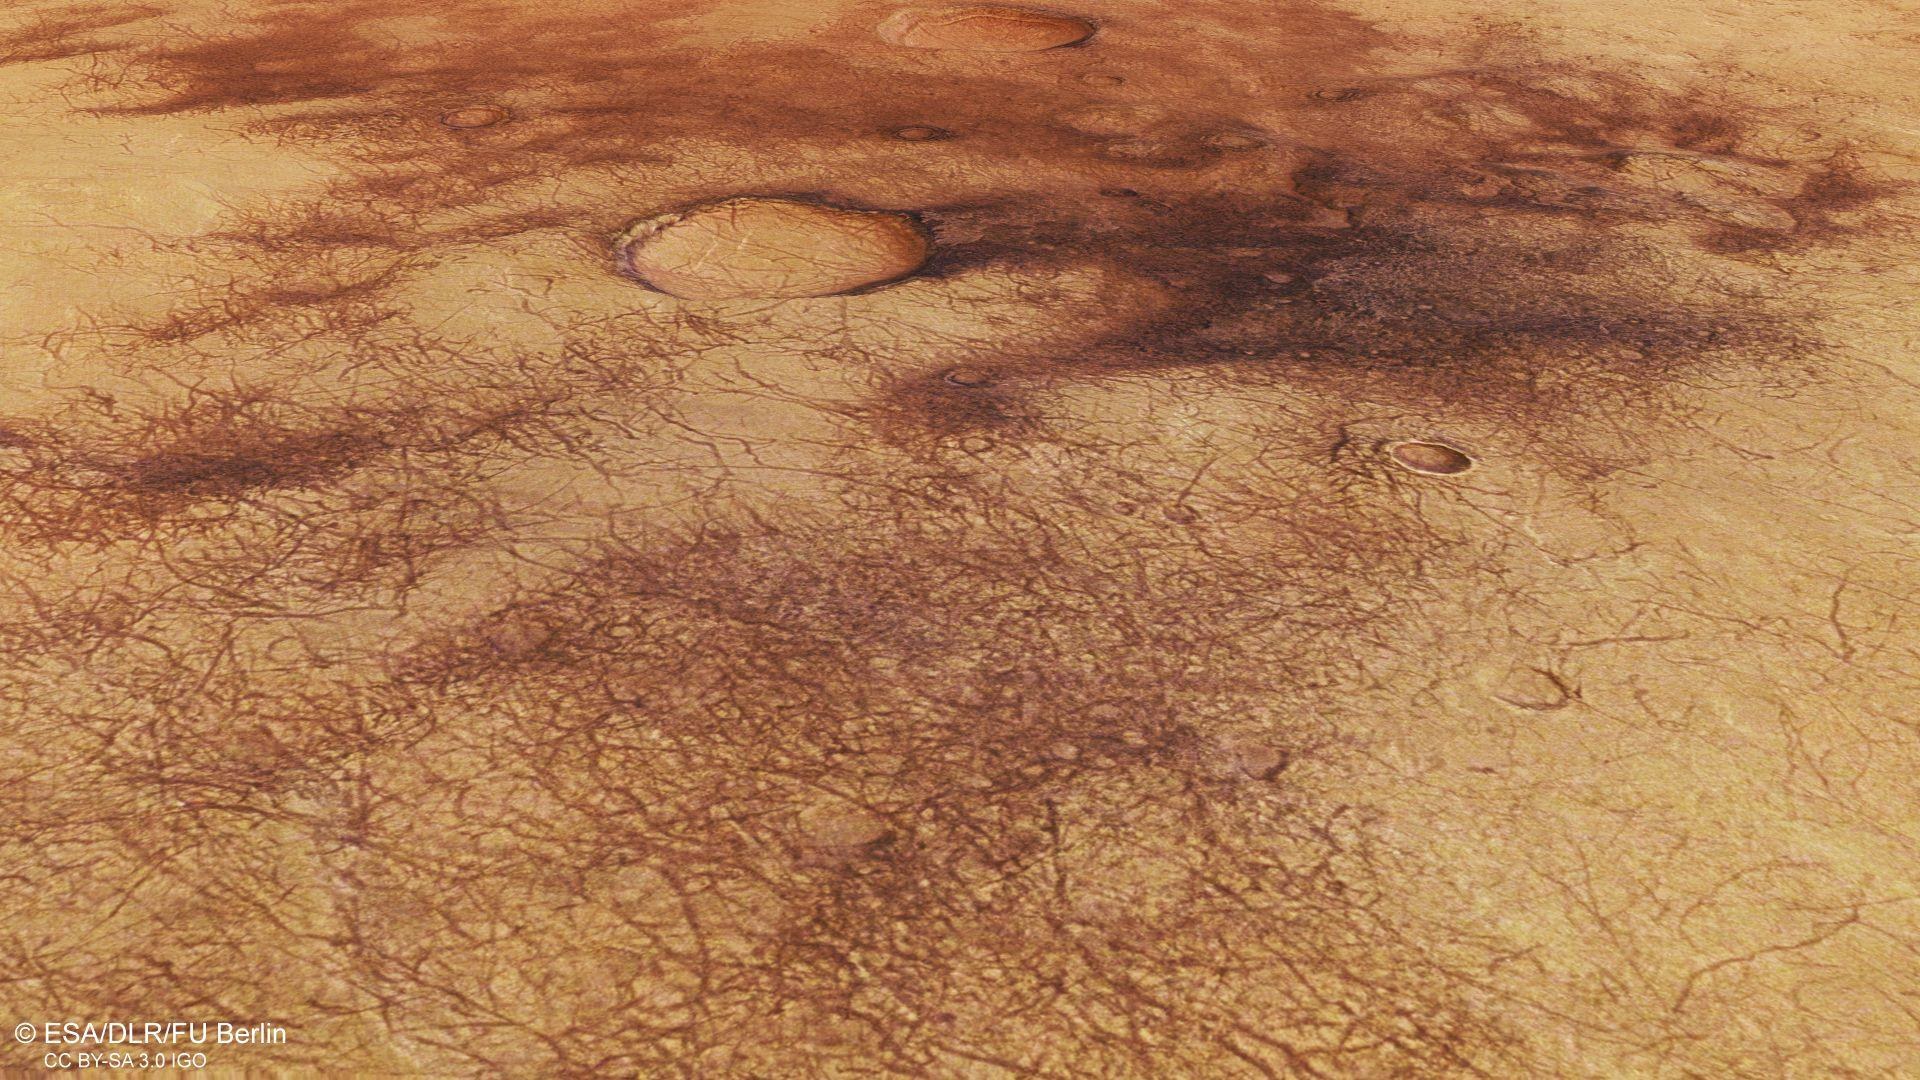 Perspective view of dust devil tracks in Chalcoporos Rupes